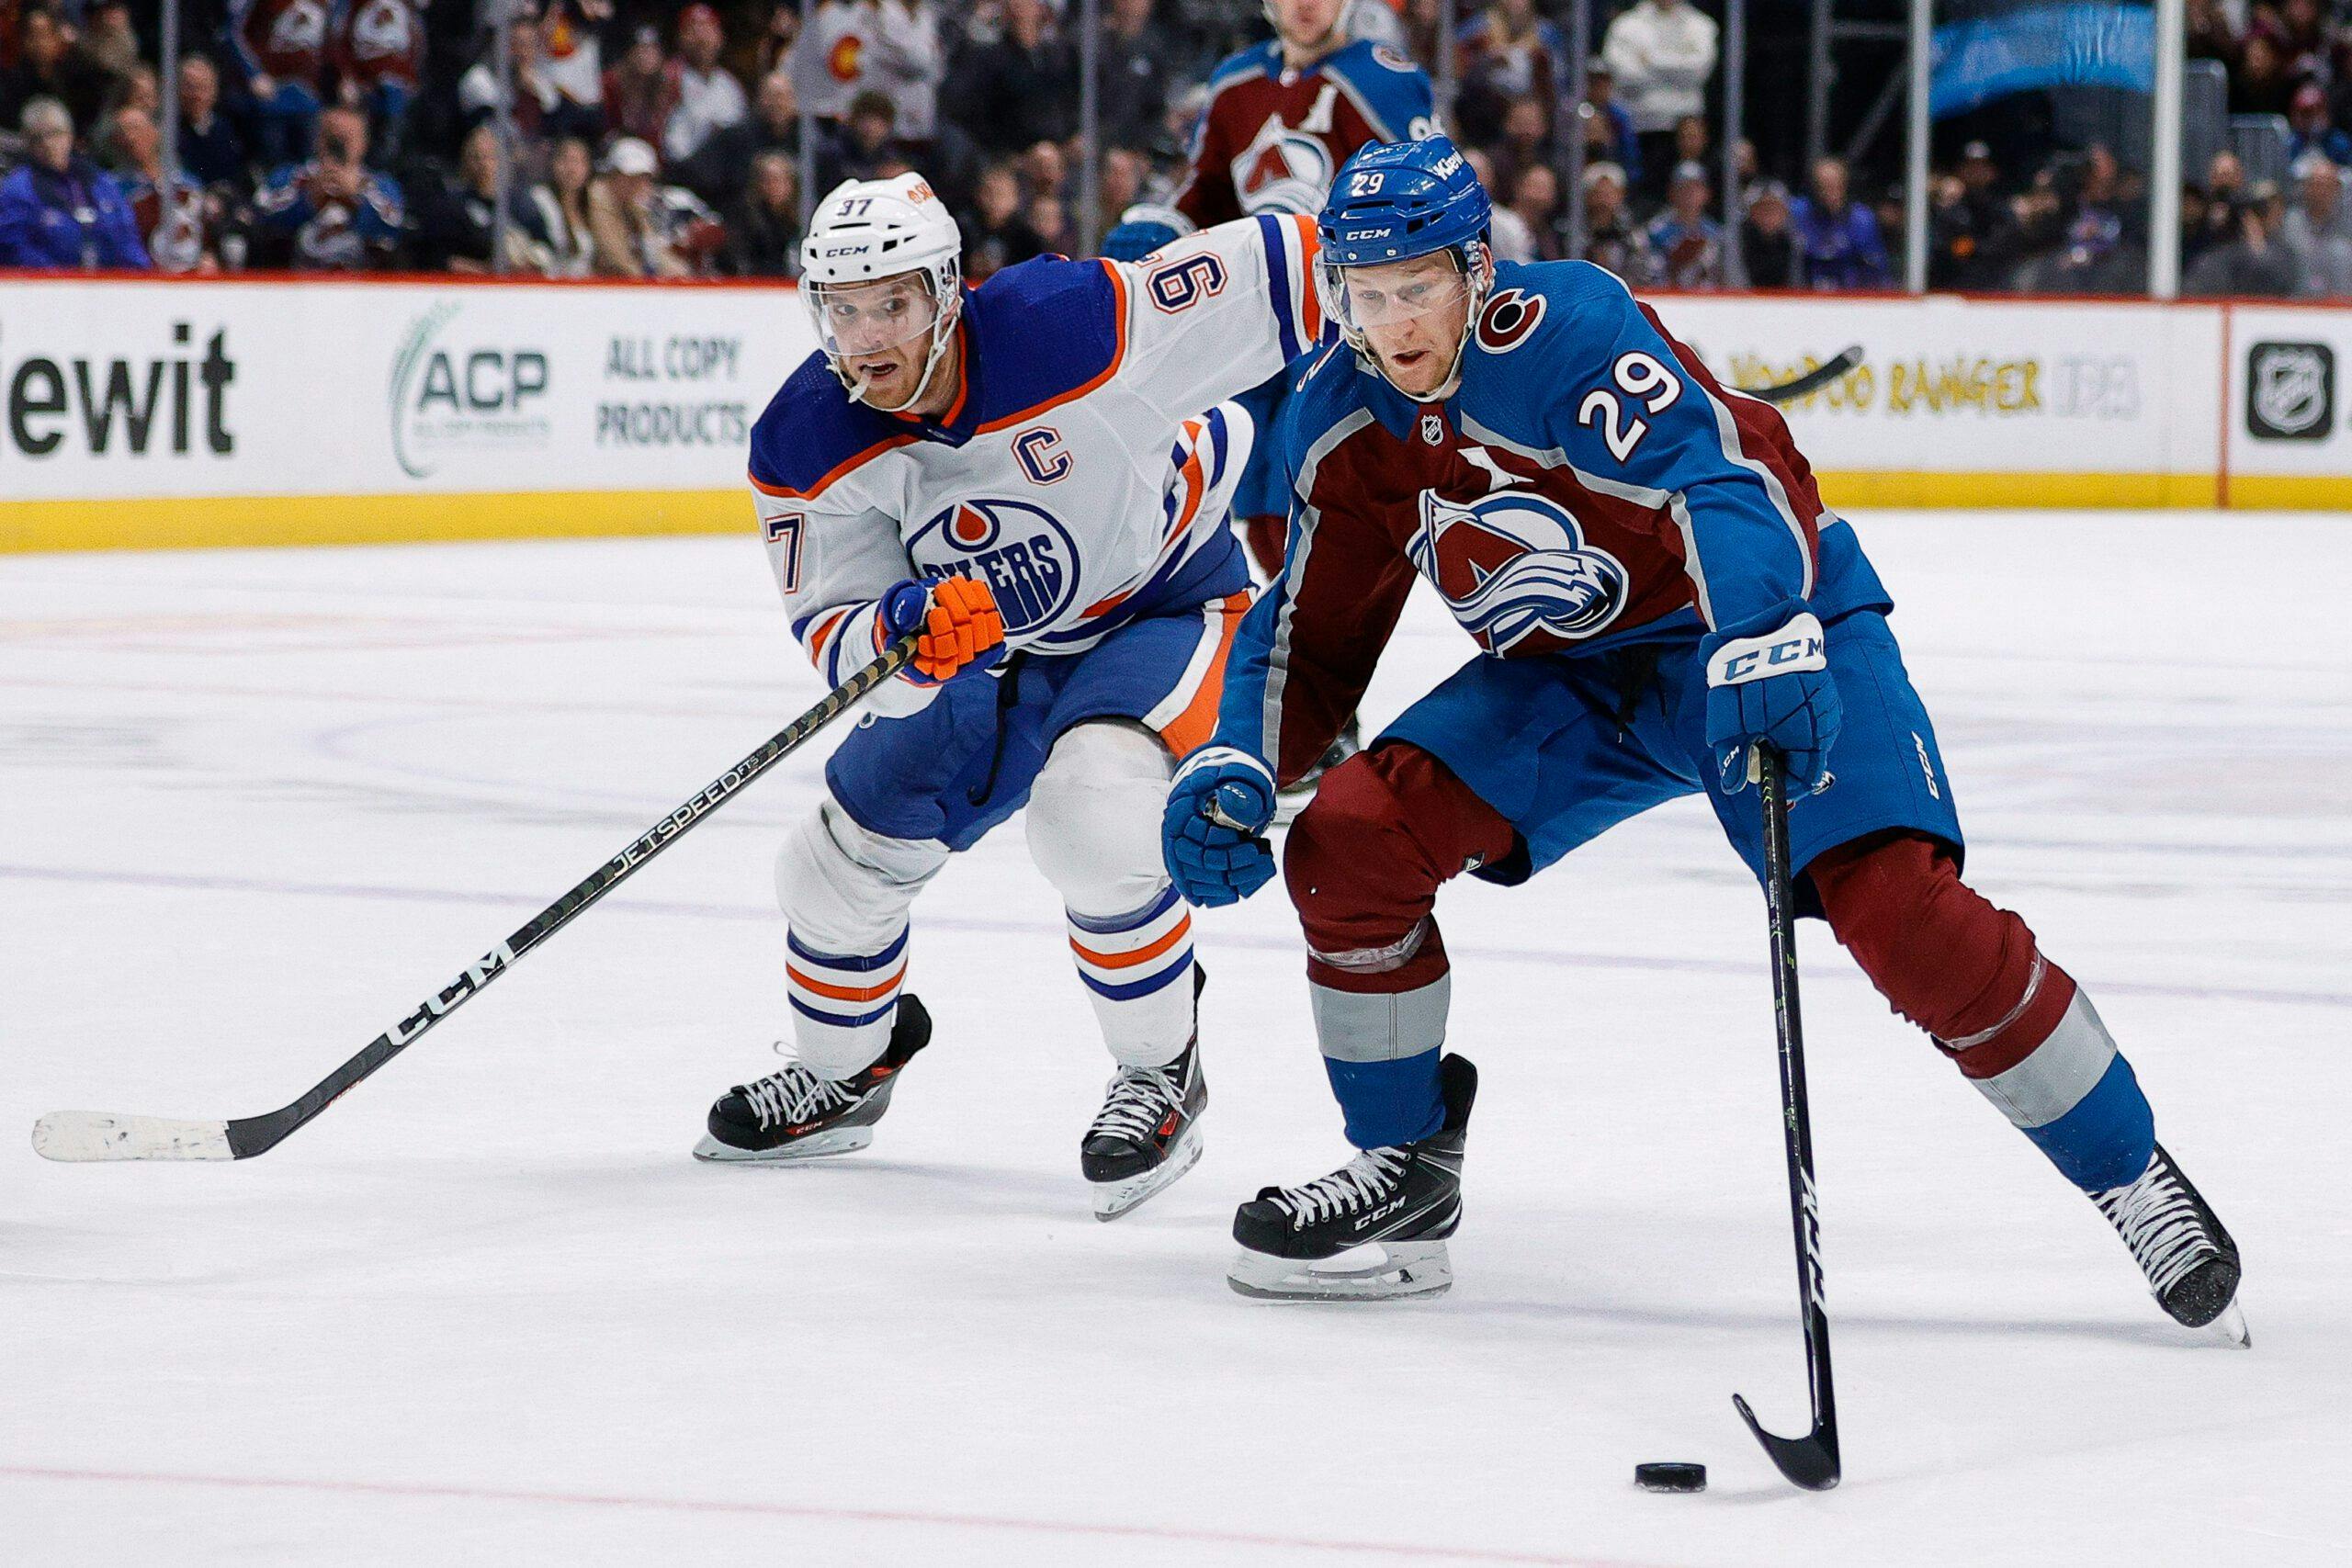 MacKinnon vs. McDavid and the five biggest NHL storylines to watch in April